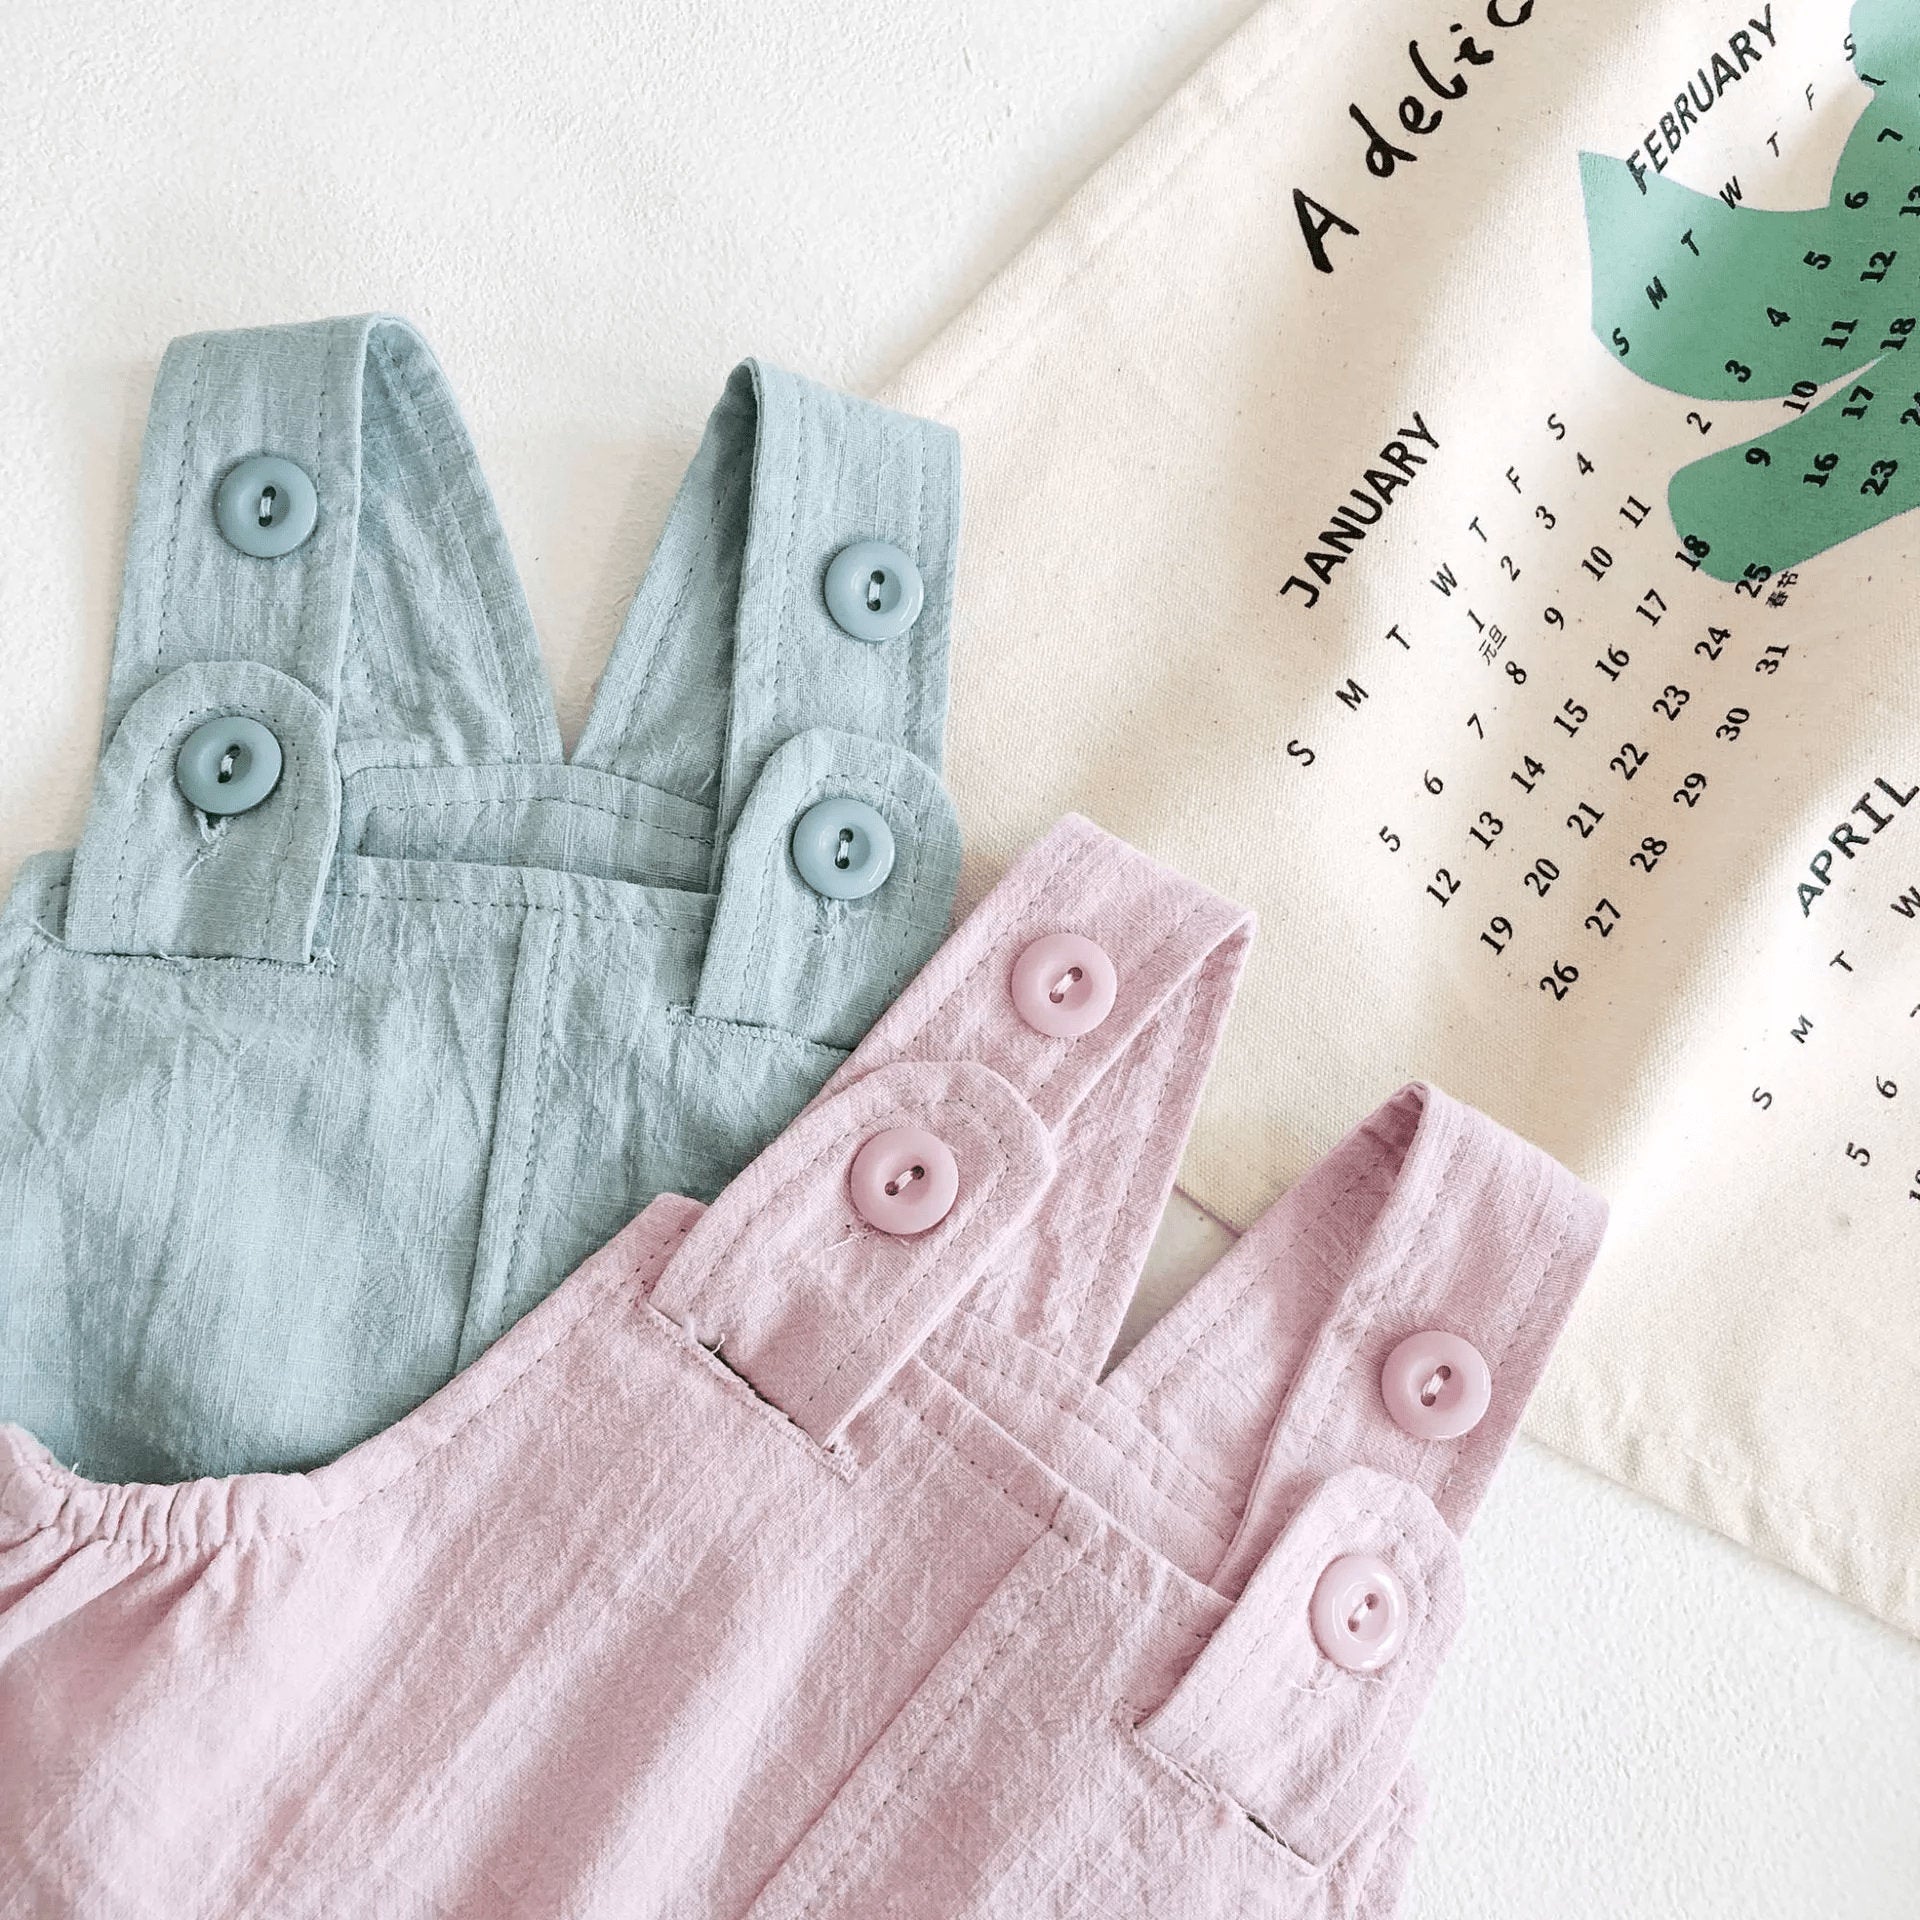 Cute Linen Cotton baby overall playsuit with pockets perfect baby shower gift